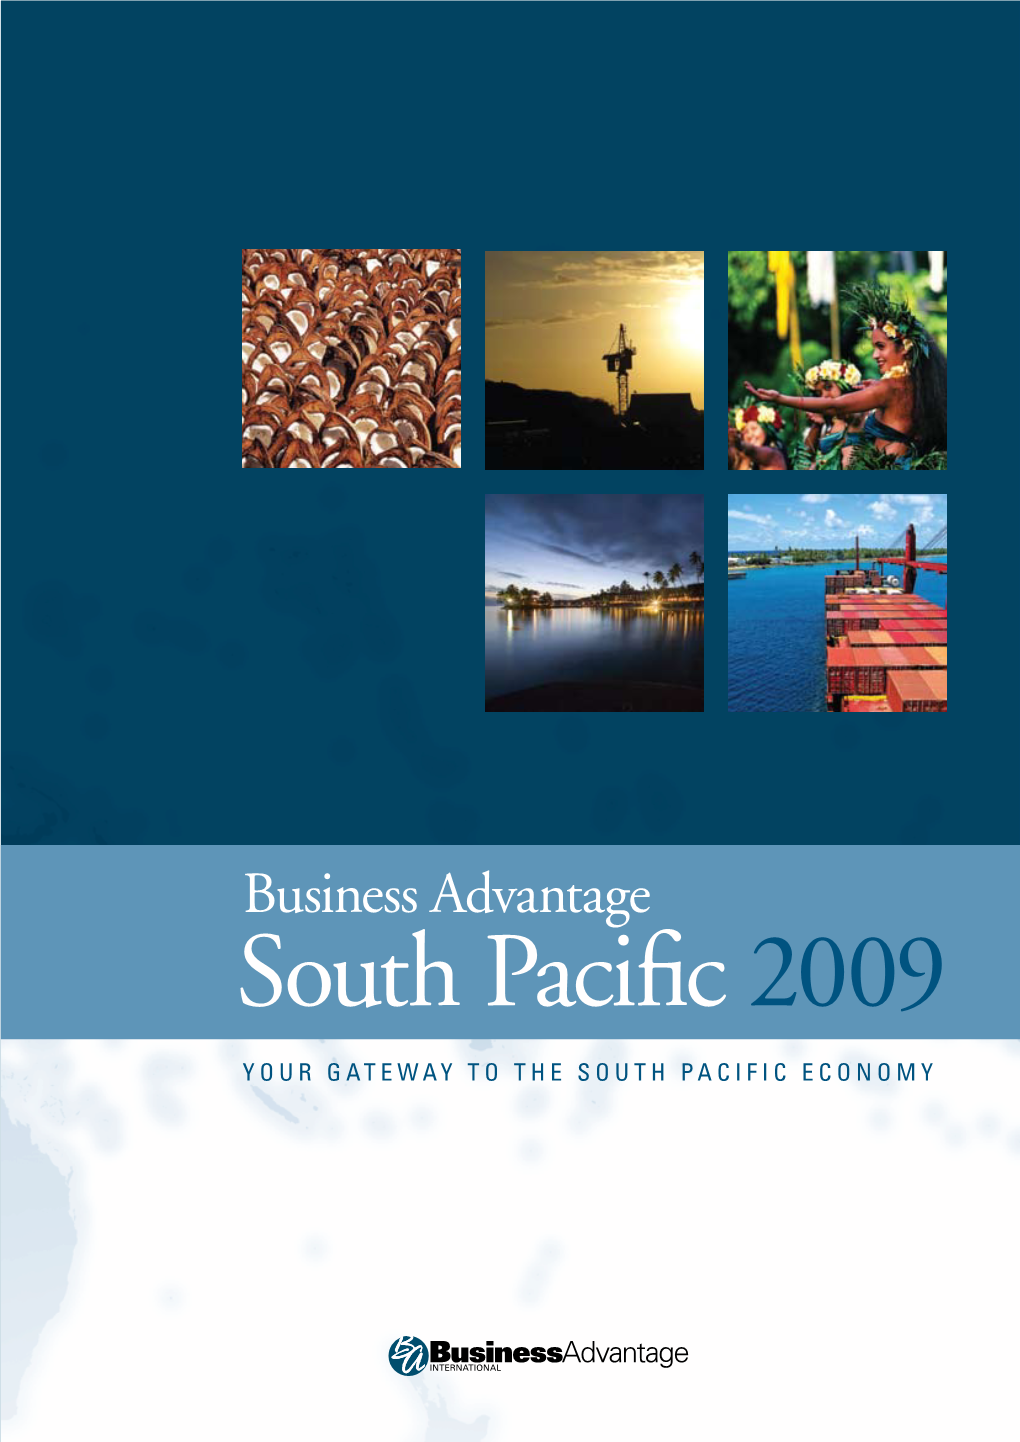 Business Advantage South Pacific 2009, Pages 1 to 11